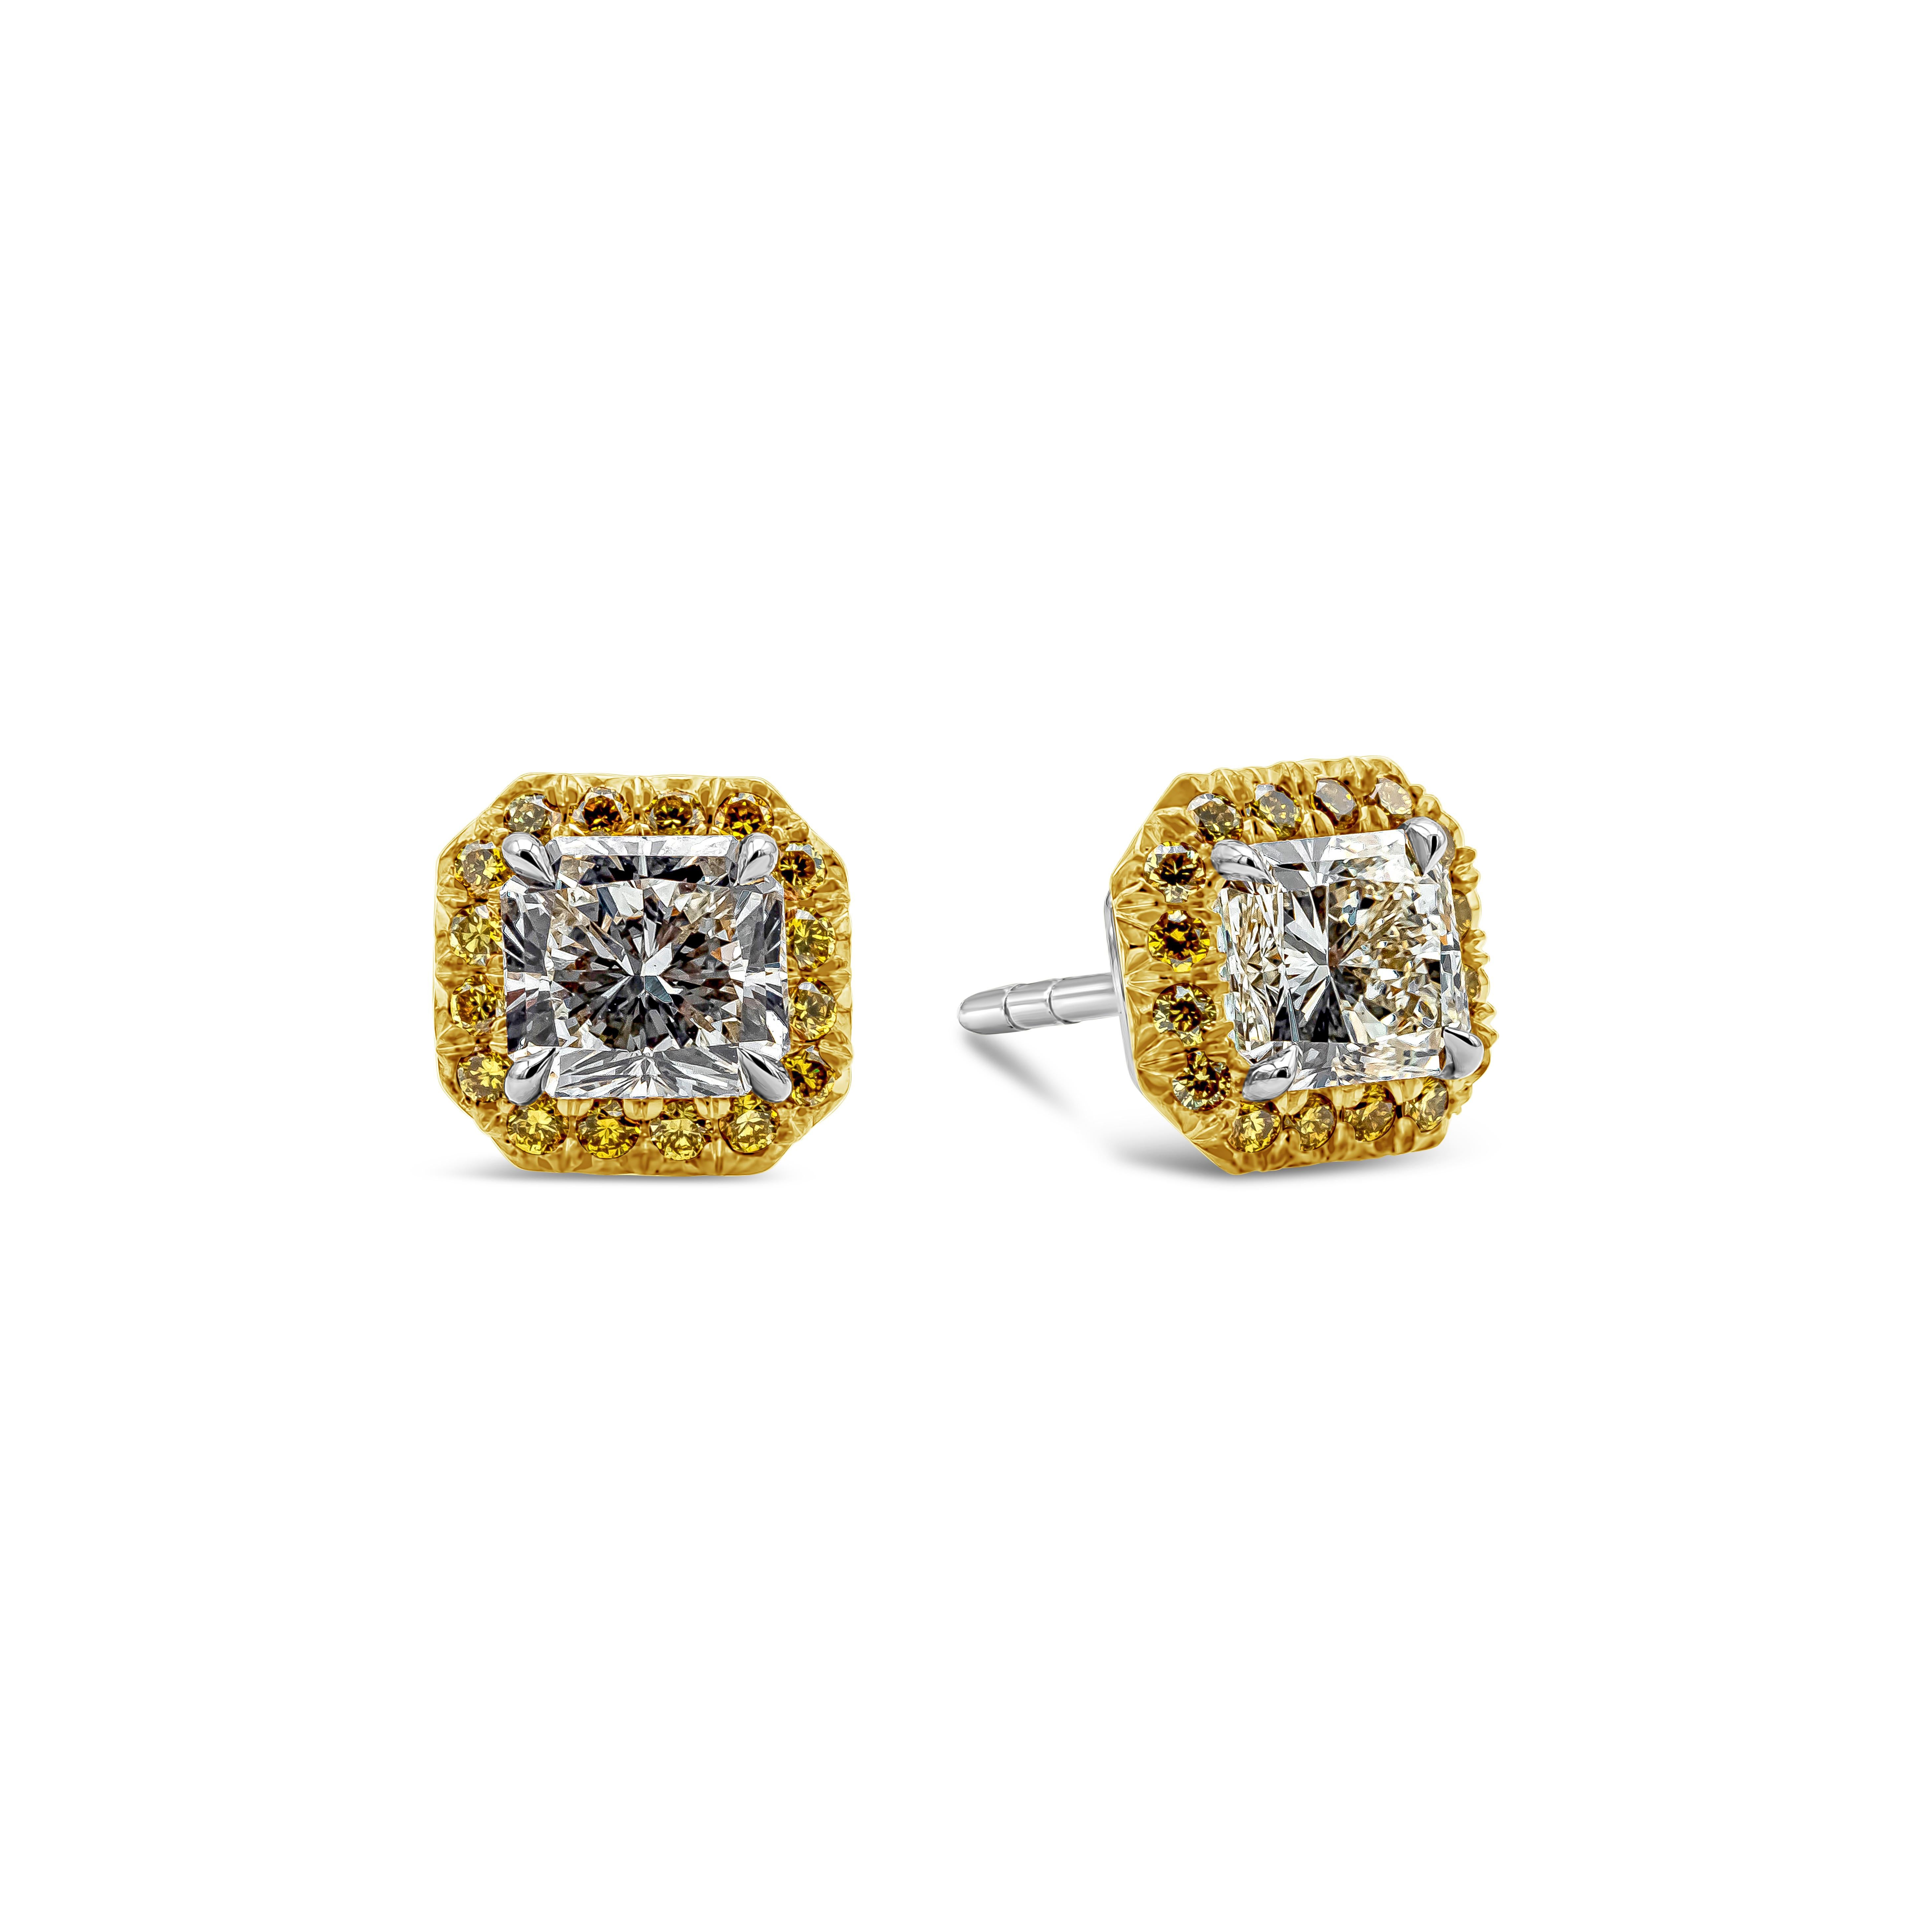 This beautiful pair of earrings showcases radiant cut diamonds weighing 1.73 carats total, K-L Color and VS1- VS2 in Clarity. Surrounded by a row of round brilliant very yellow diamonds weighing 0.35 carats total, VS in Clarity. Made with